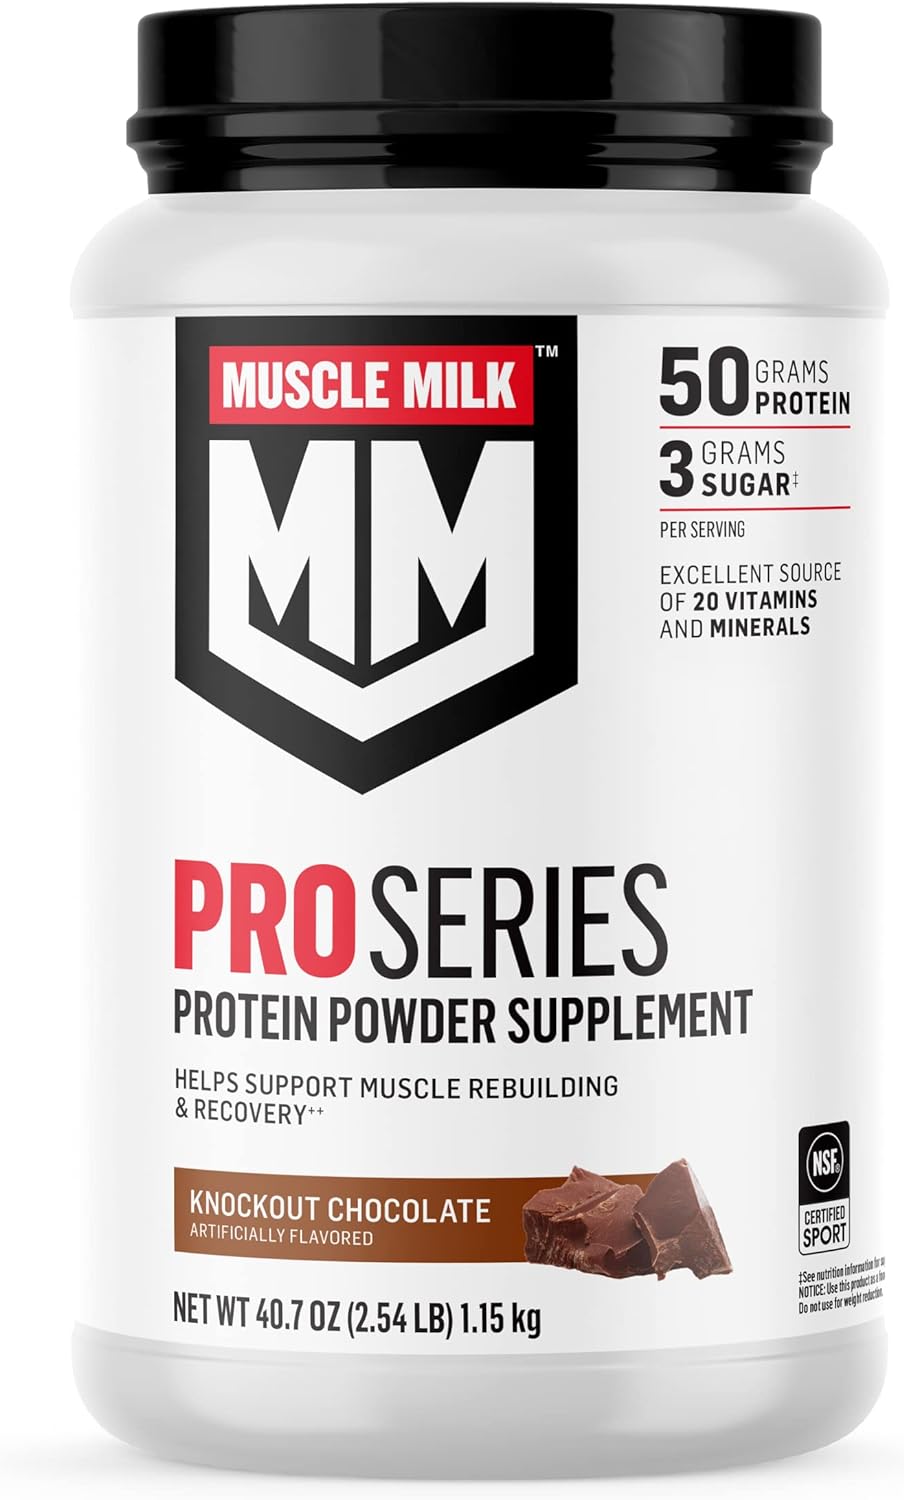 Muscle Milk Pro Series Protein Powder Supplement, Knockout Chocolate,